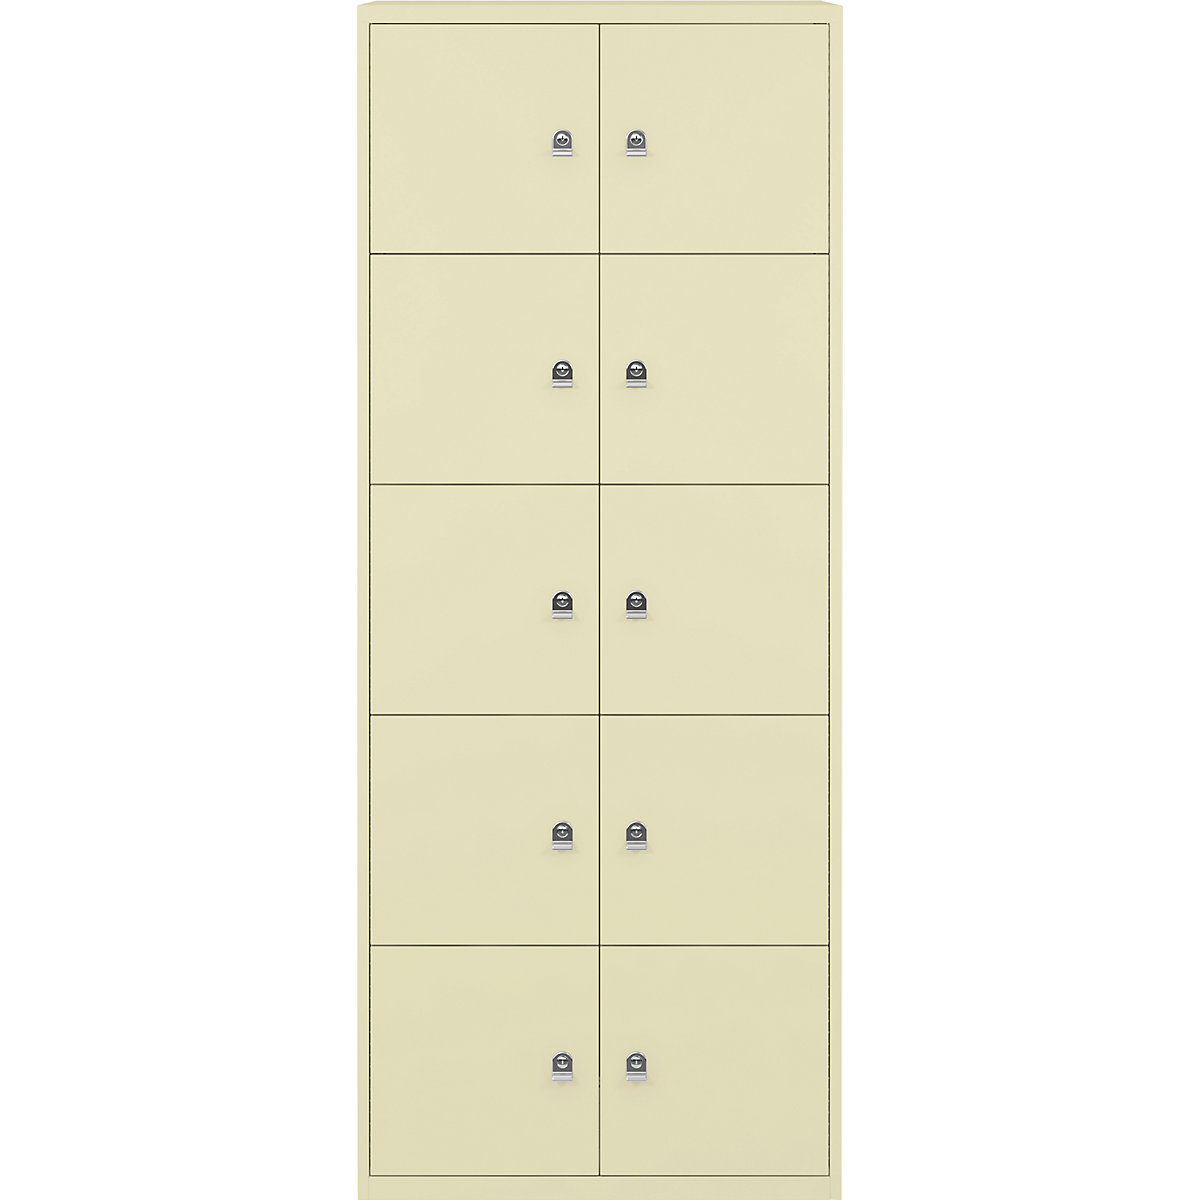 LateralFile™ lodge – BISLEY, with 10 lockable compartments, height 375 mm each, cream